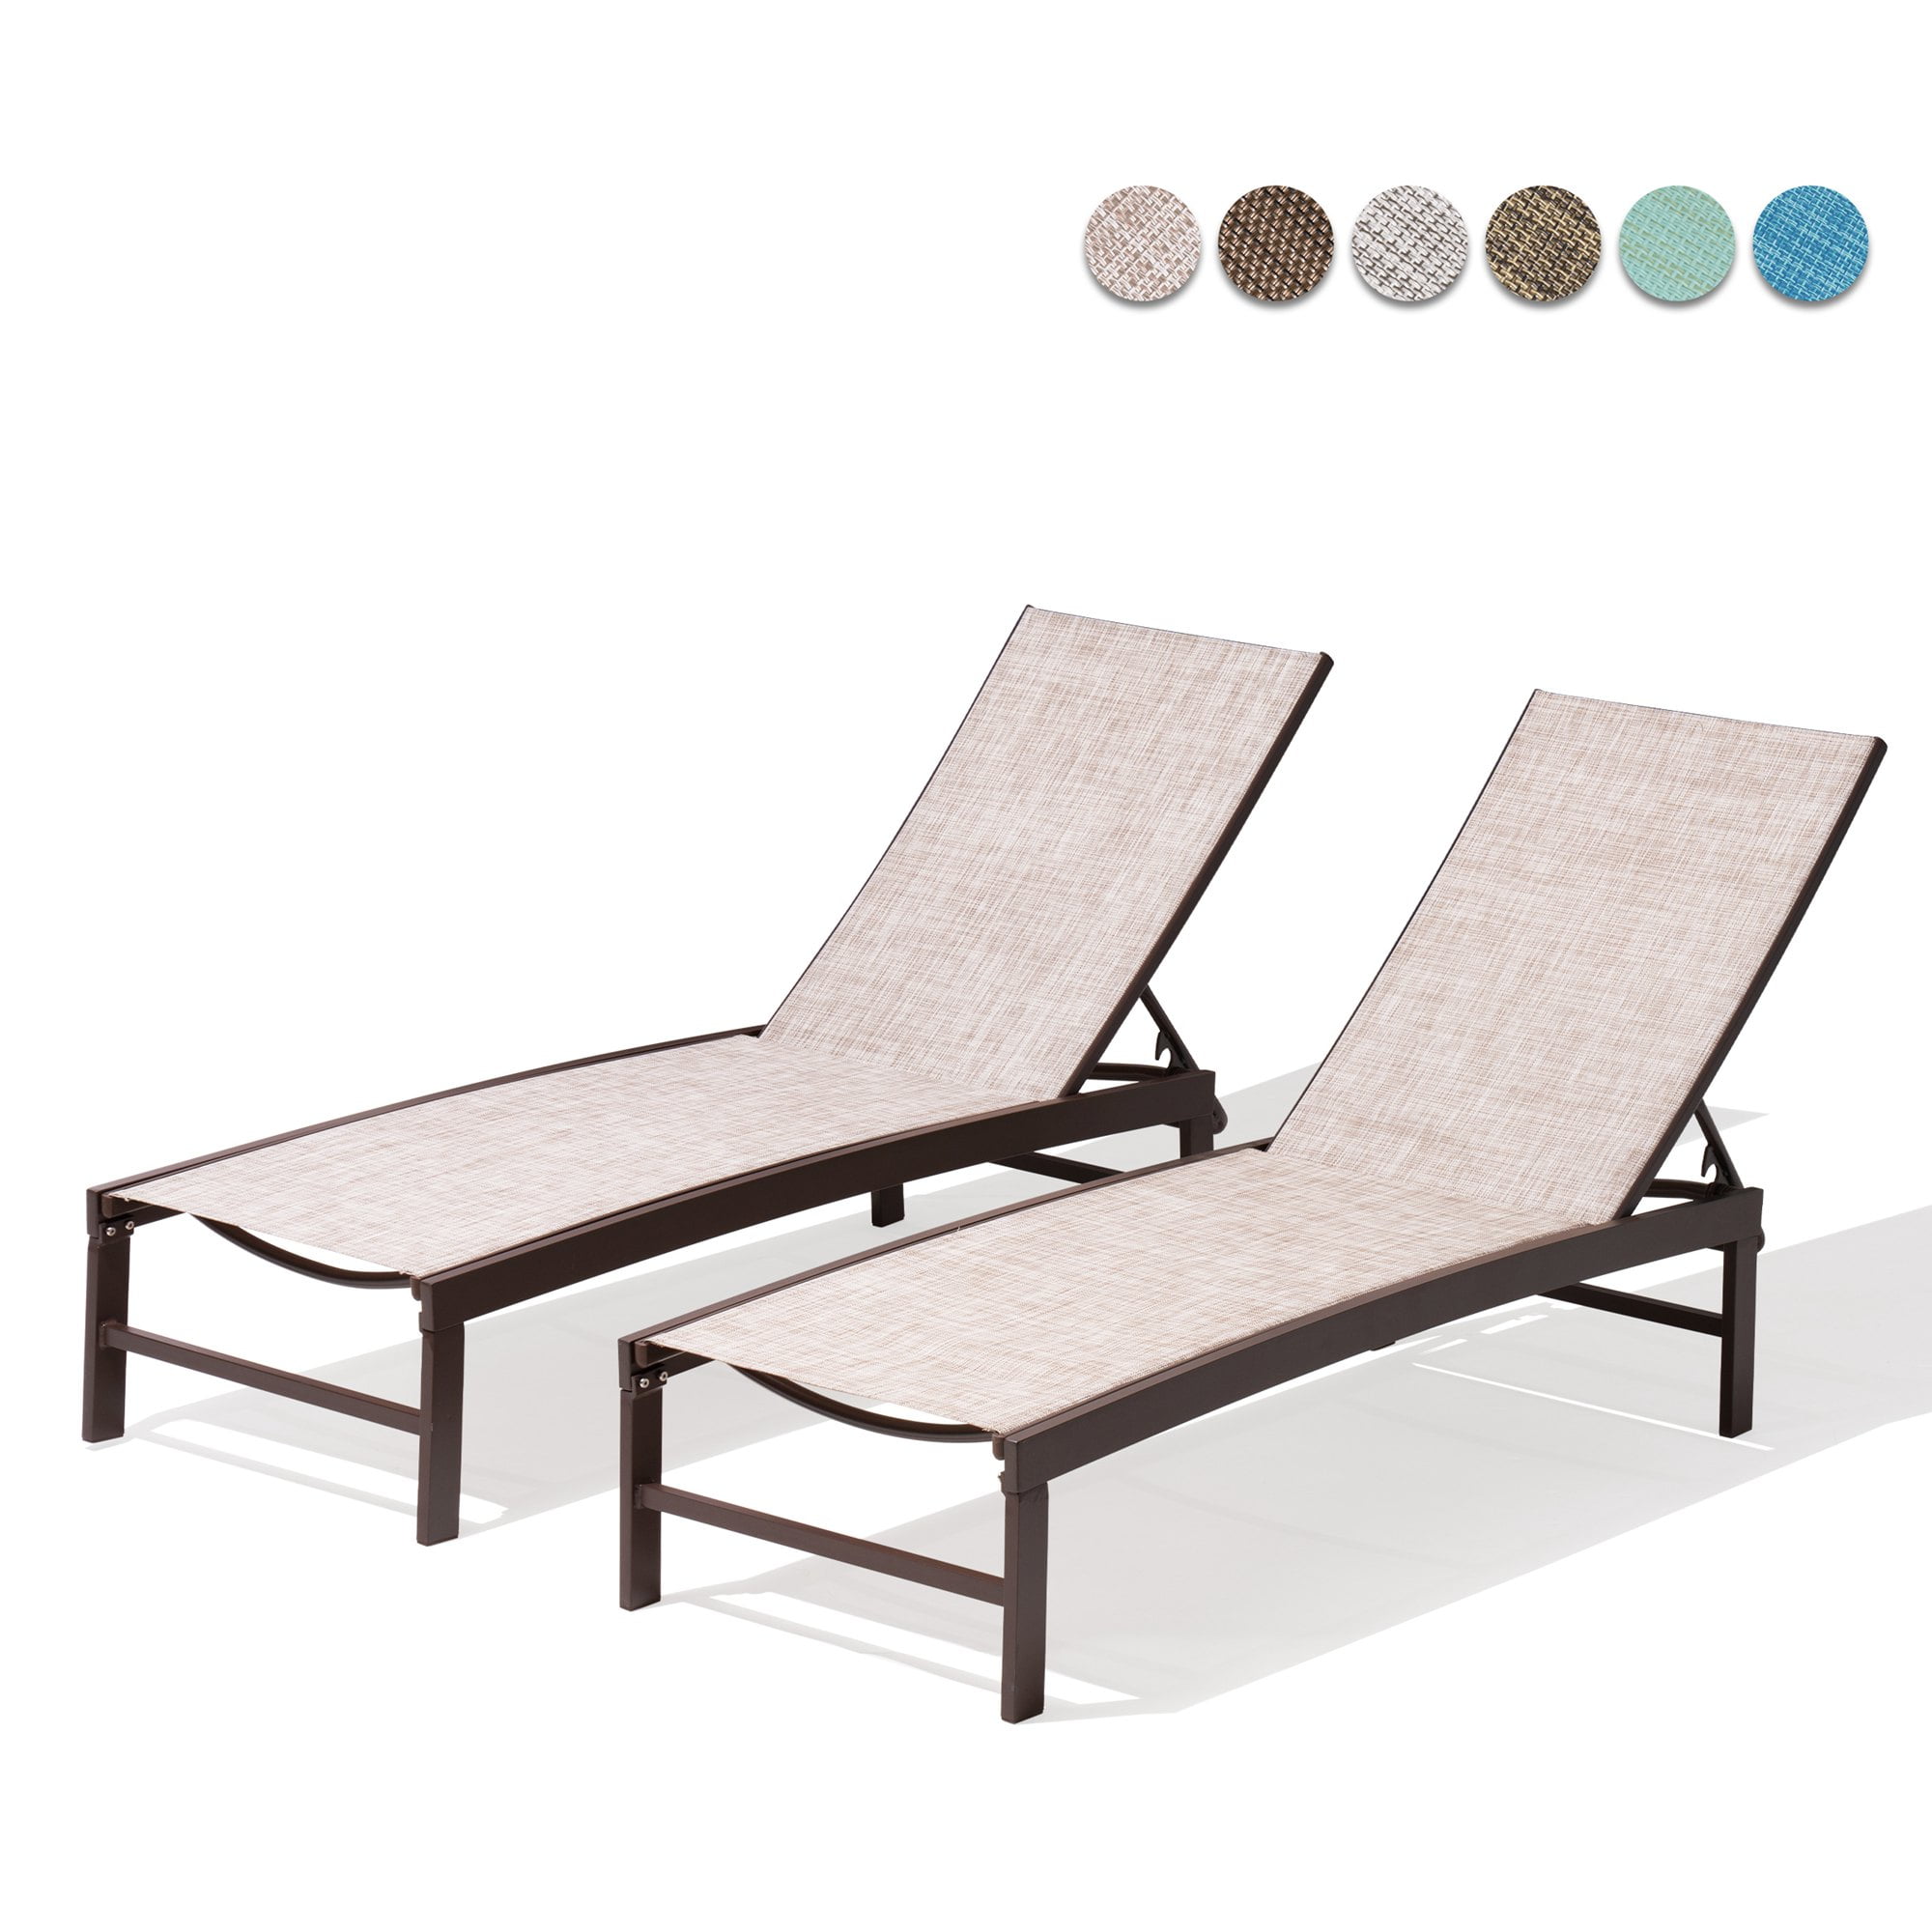 Pellebant Beige Patio Outdoor Chairs Aluminum Adjustable Lounge Chaise (Set of 2)